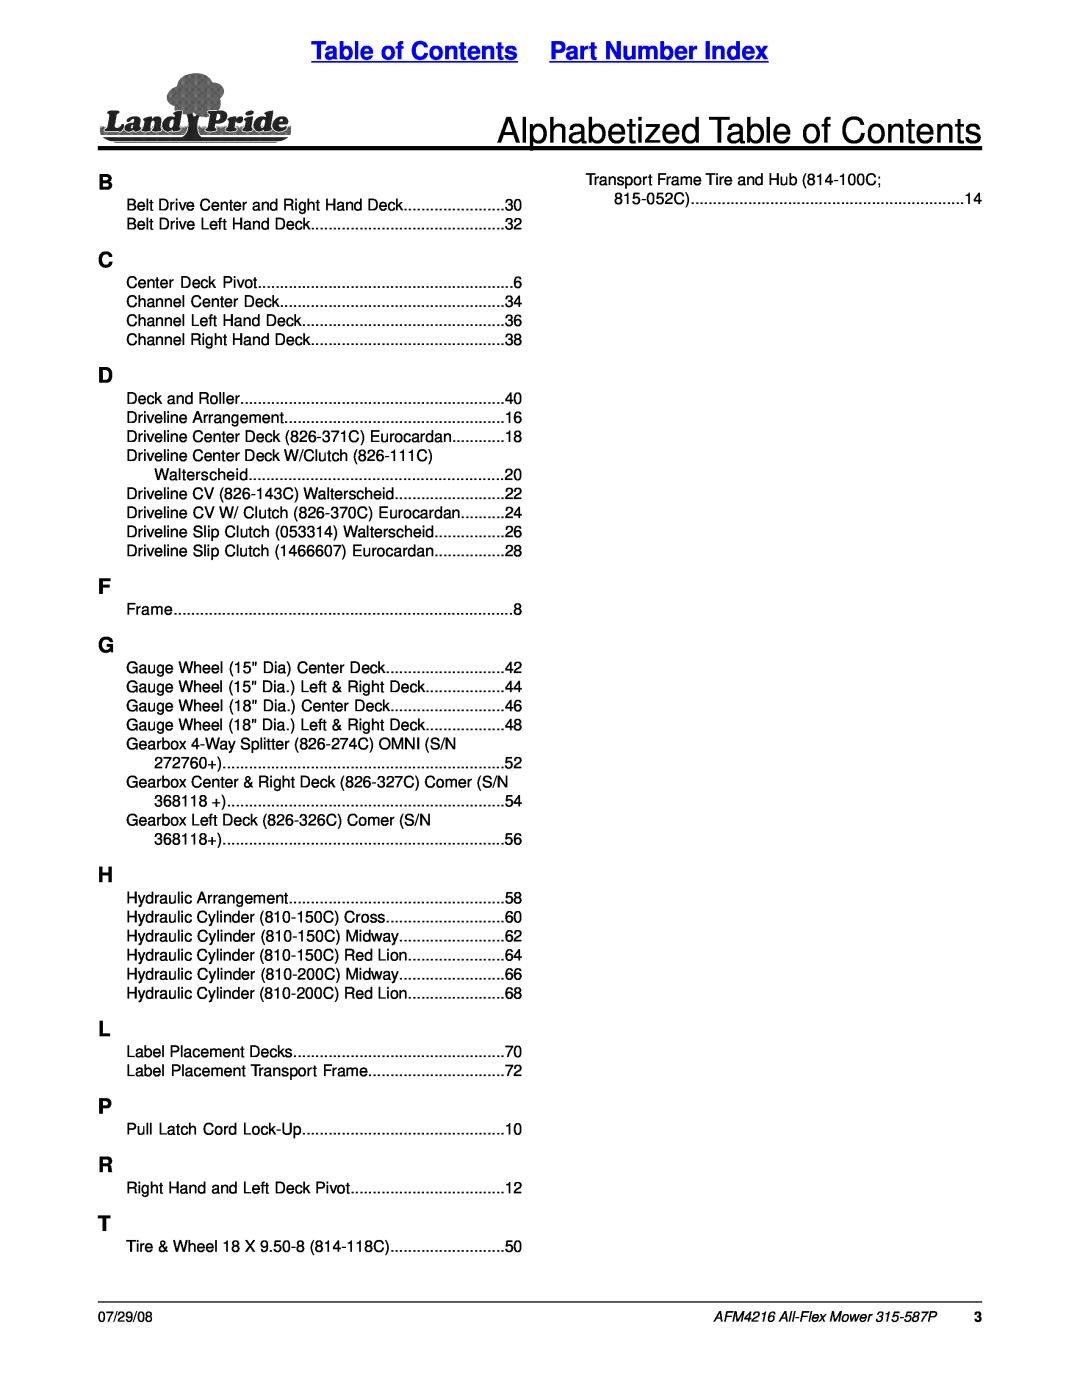 Land Pride AFM4216 manual Alphabetized Table of Contents, Table of Contents Part Number Index 